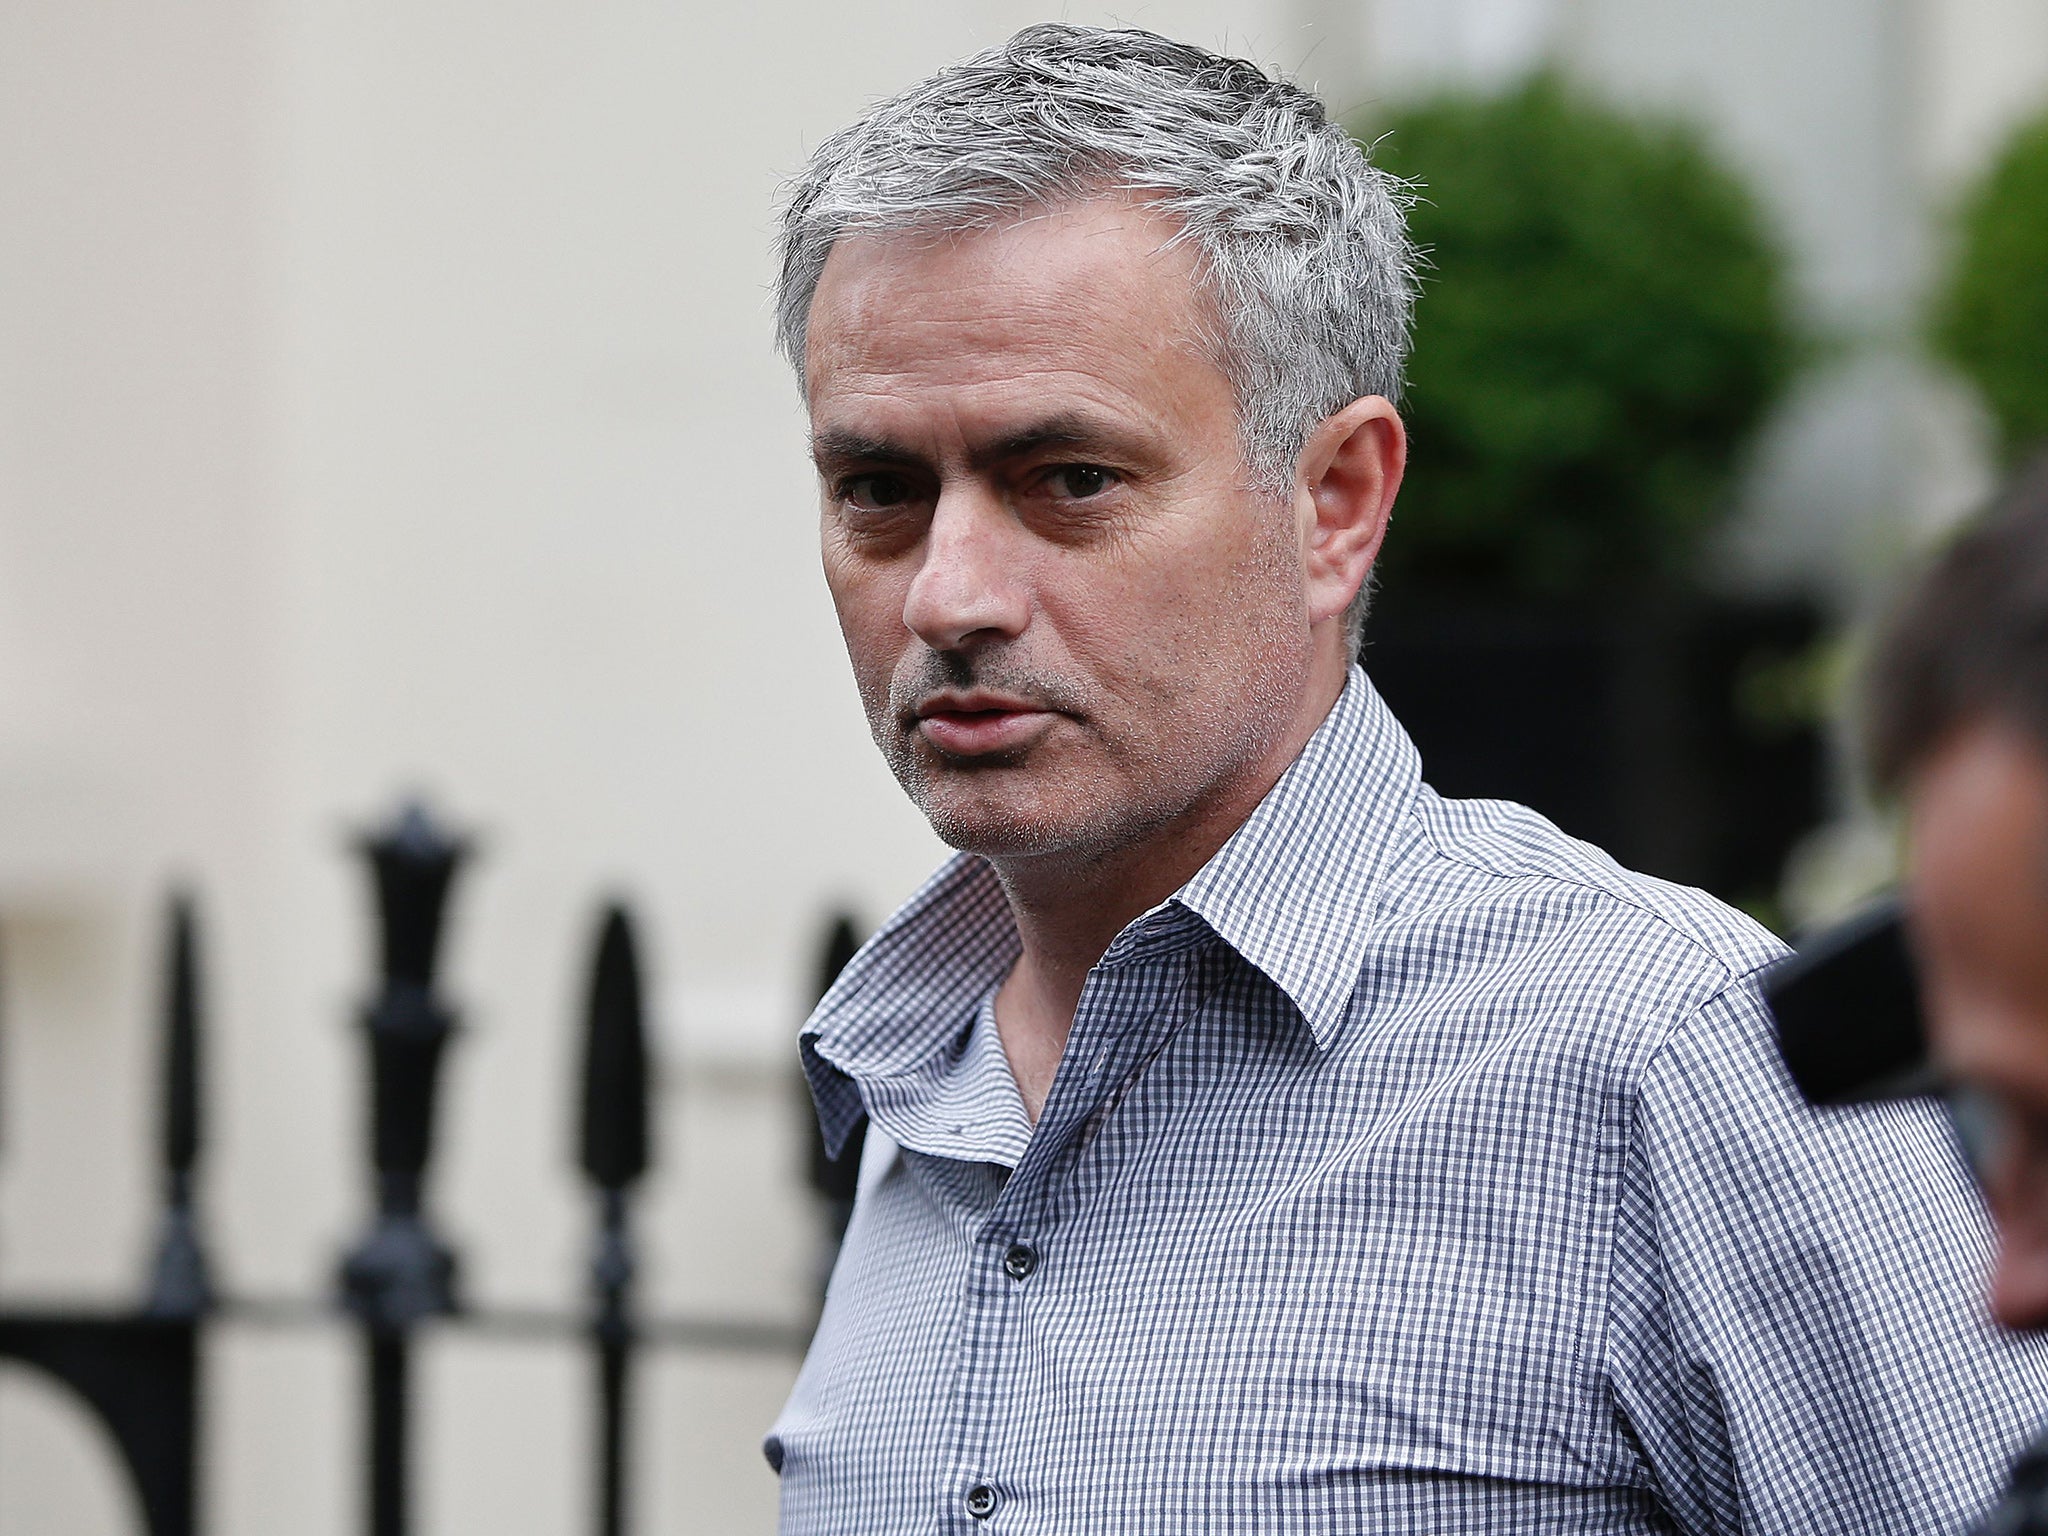 Jose Mourinho leaves his home in central London